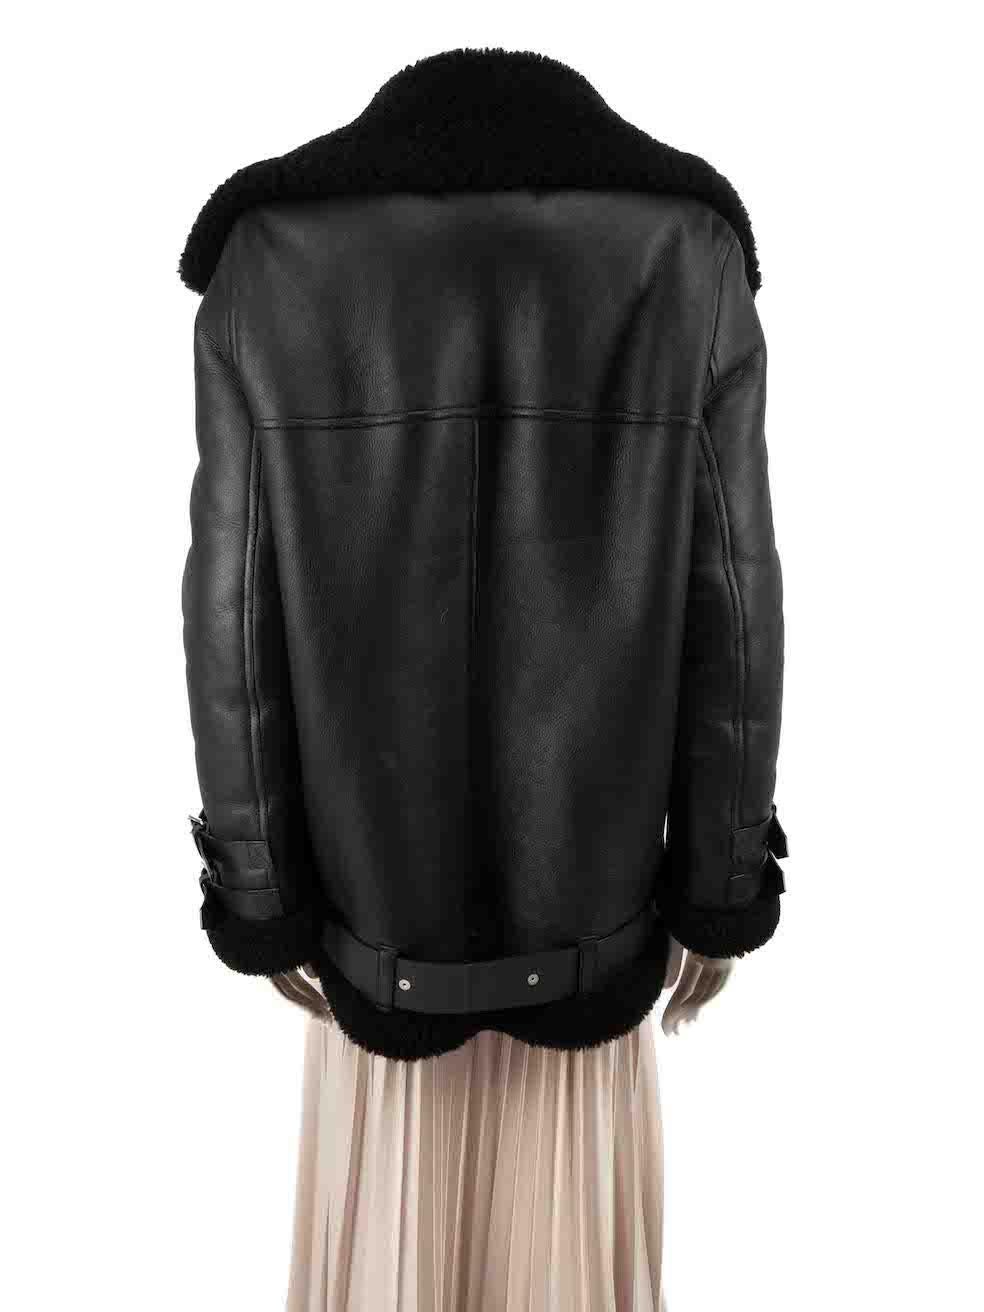 Acne Studios Black Leather Shearling Biker Jacket Size M In Good Condition For Sale In London, GB